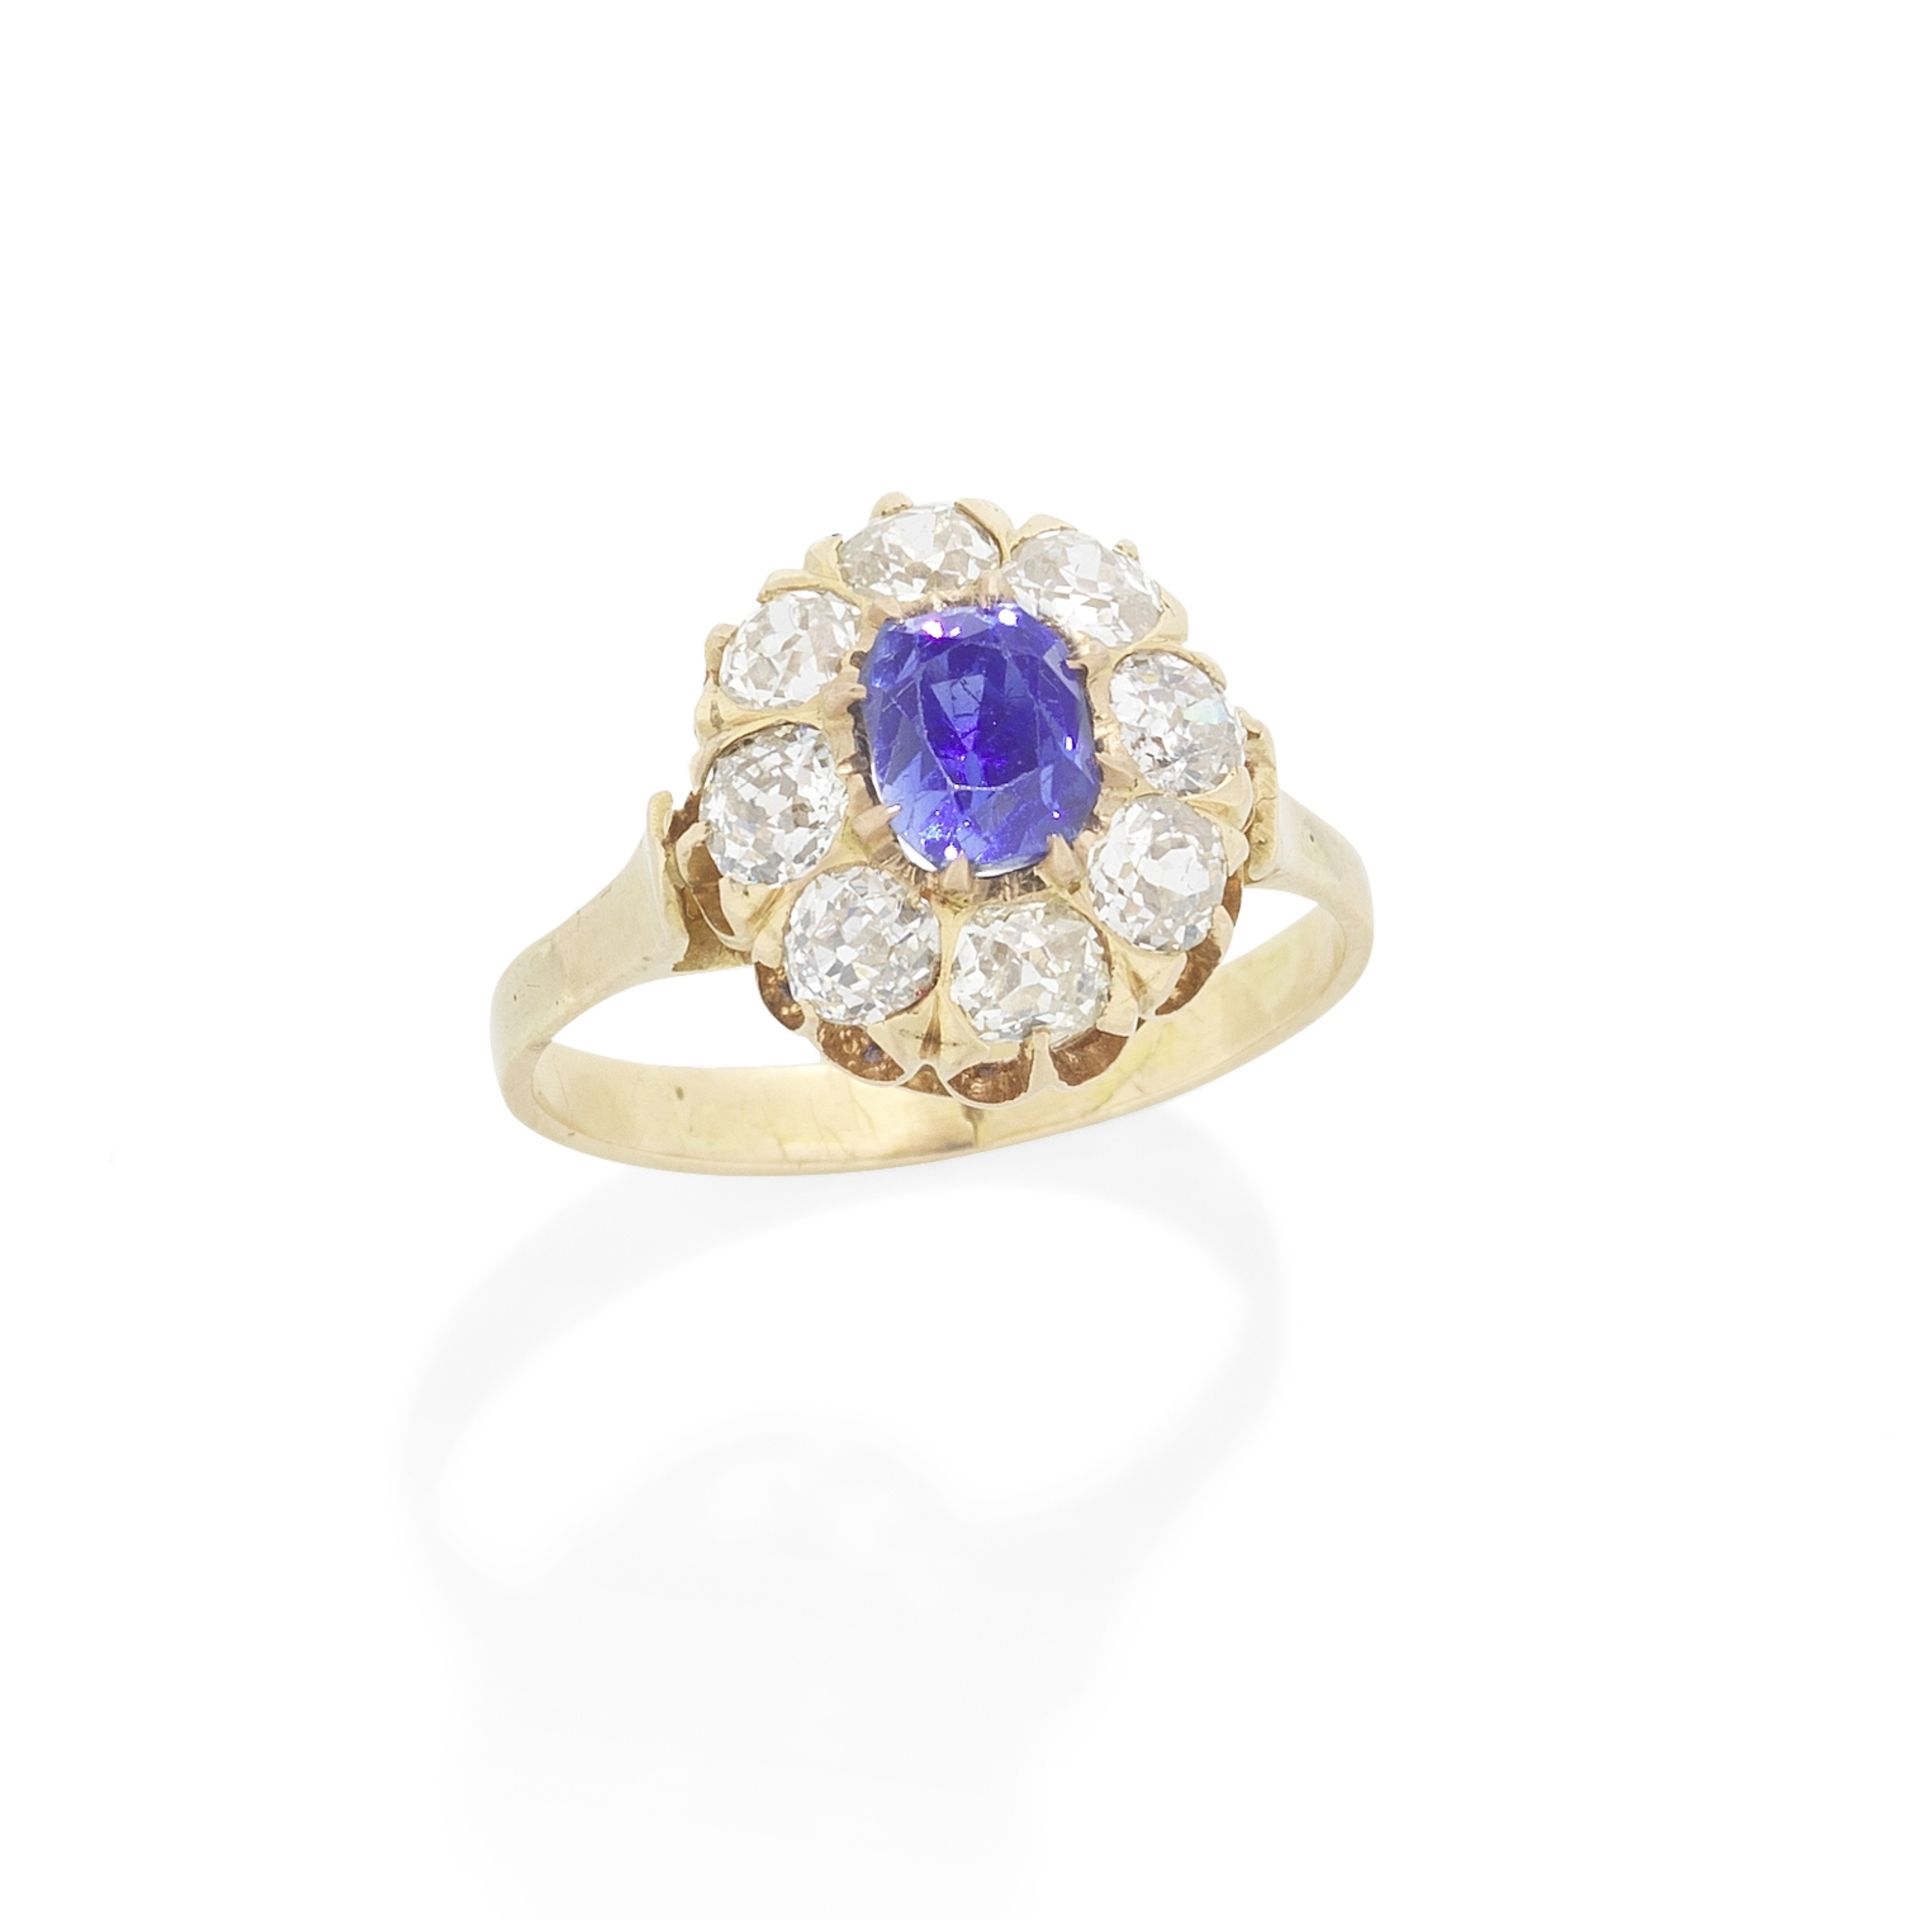 SAPPHIRE AND DIAMOND CLUSTER RING, LATE 19TH CENTURY